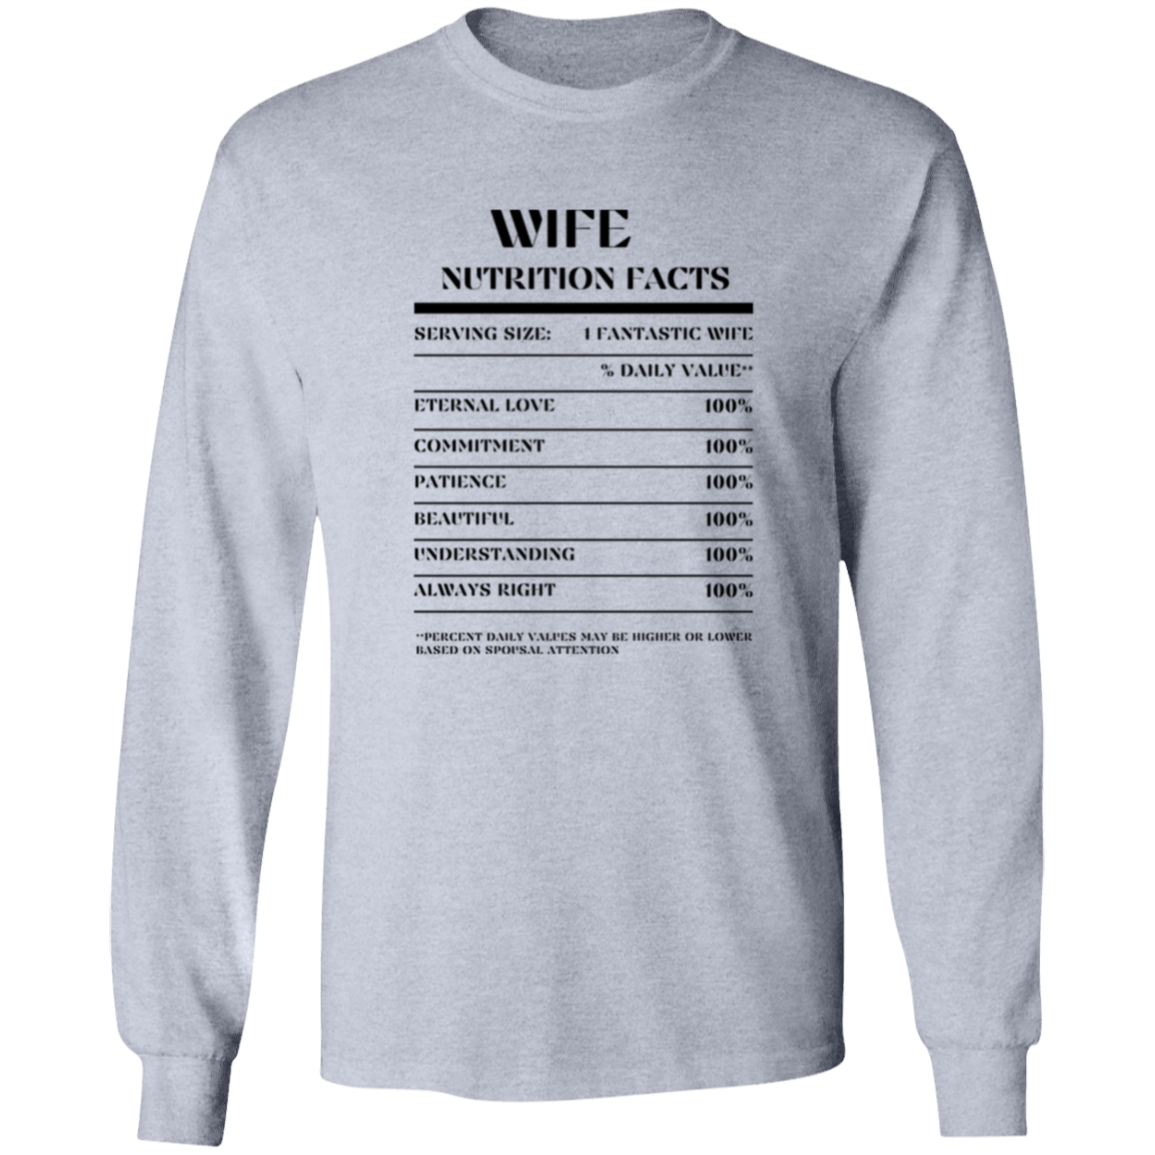 Nutrition Facts T-Shirt LS - Wife - Black